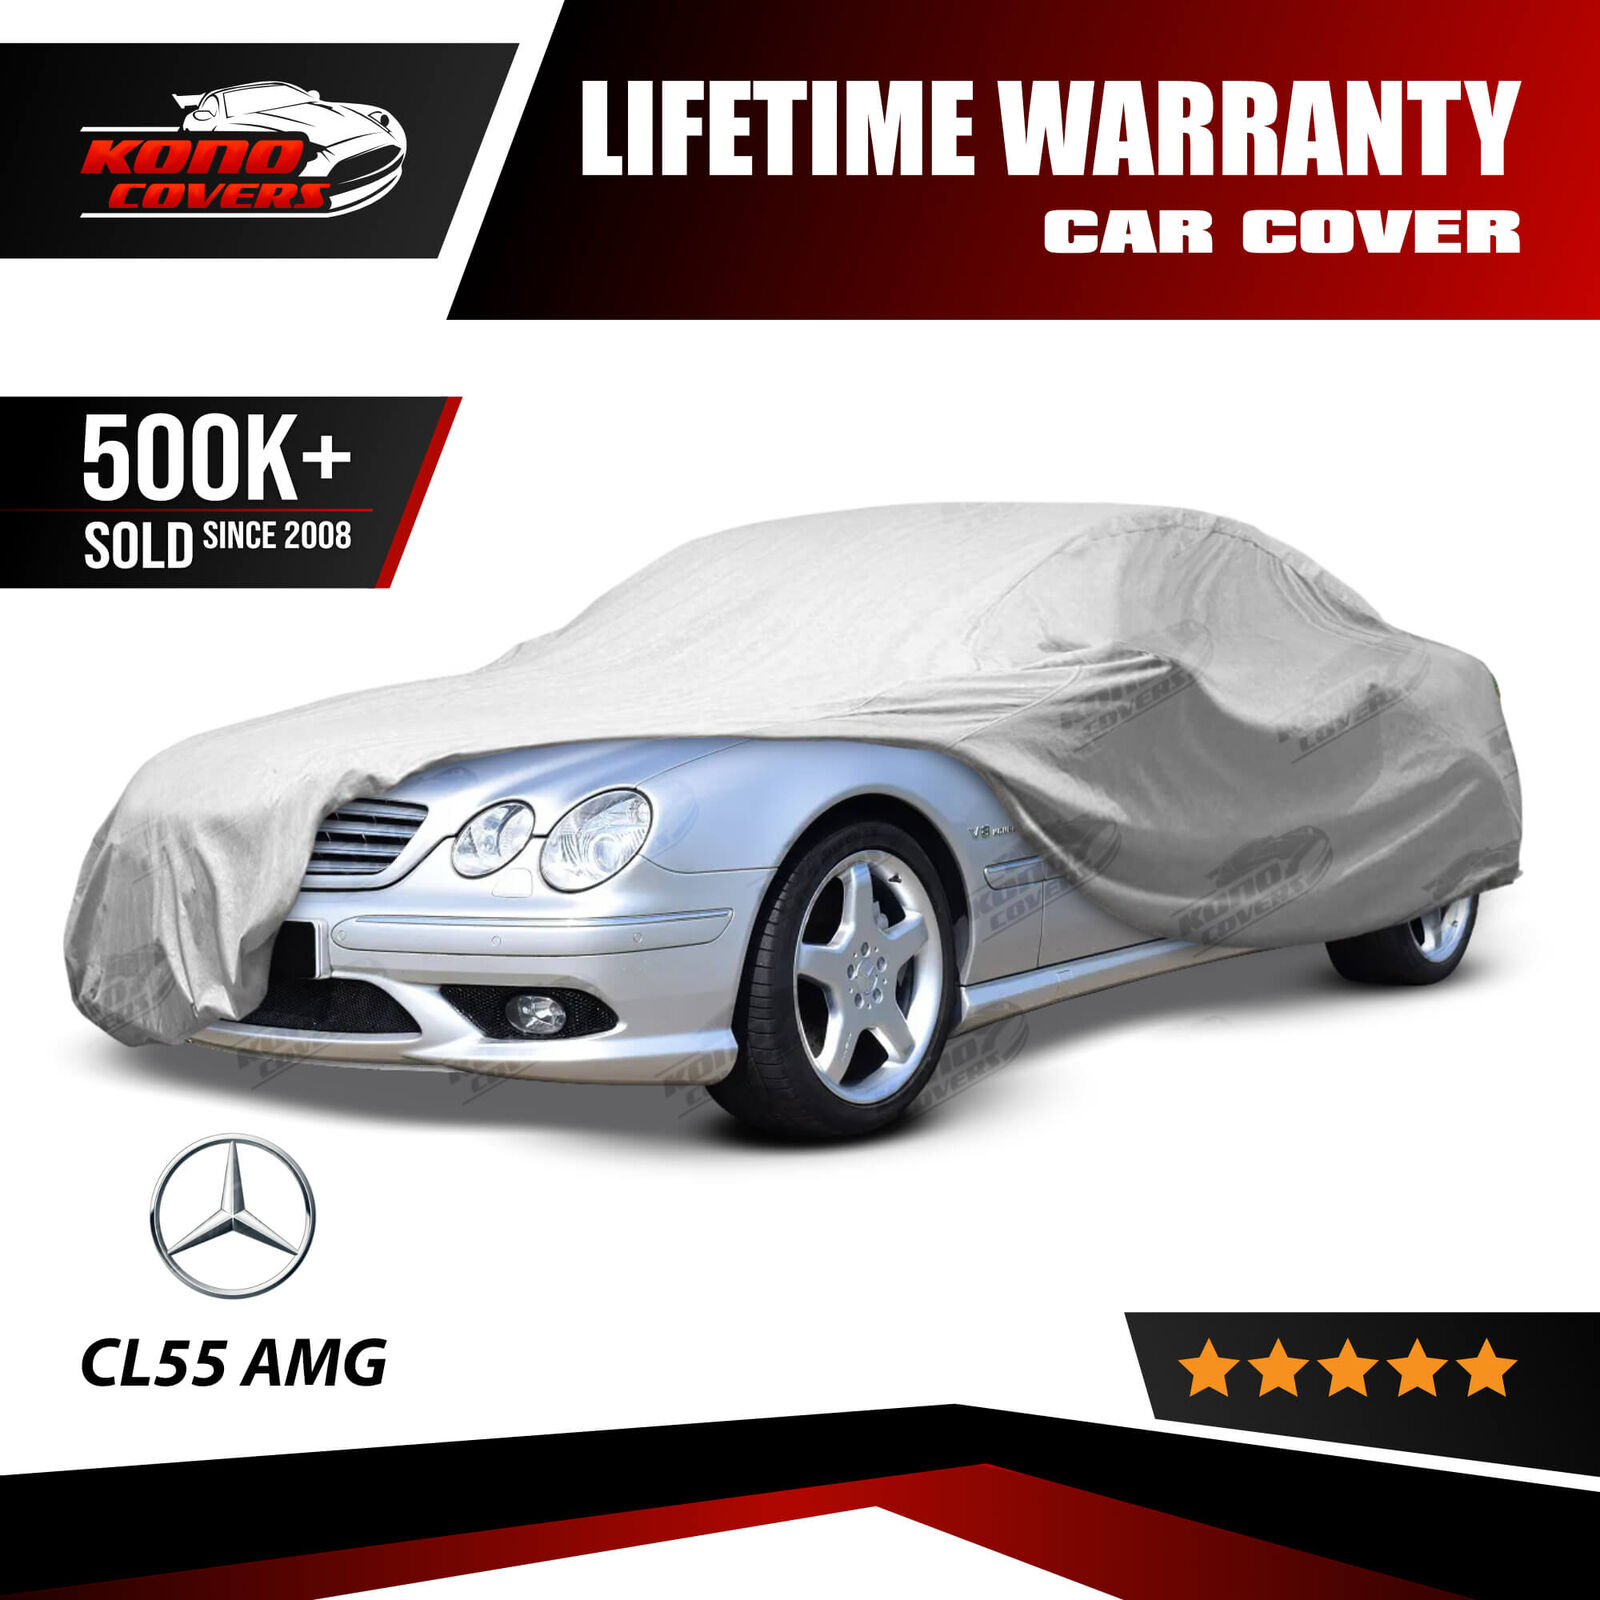 Mercedes-Benz Cl55 Amg 5 Layer Car Cover 2001 2002 2003 2004 2005 2006